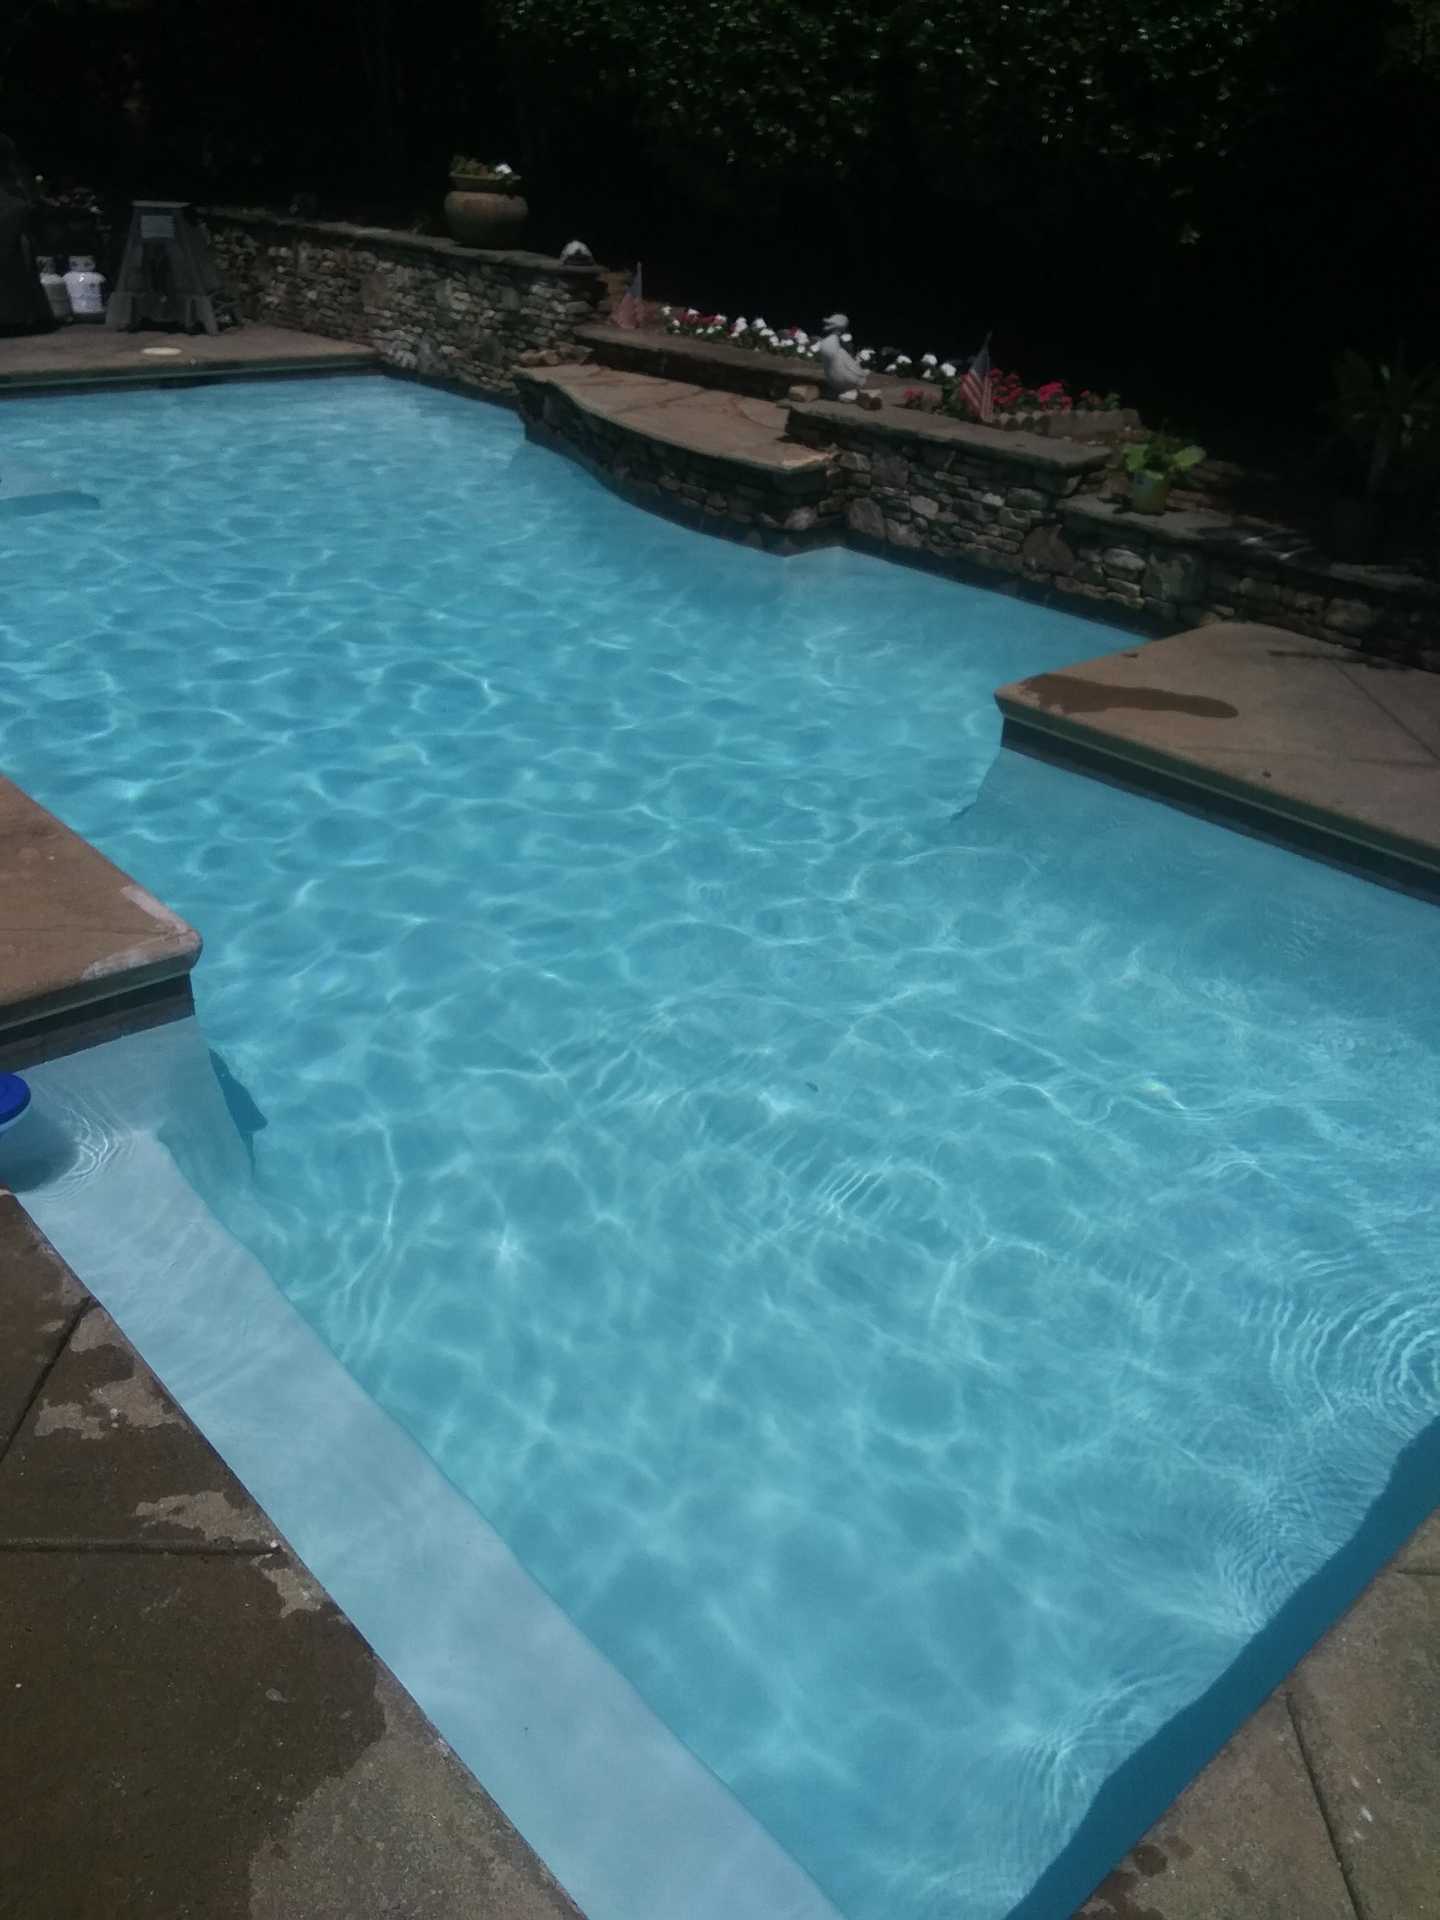 Professional Pool Cleaning Services"